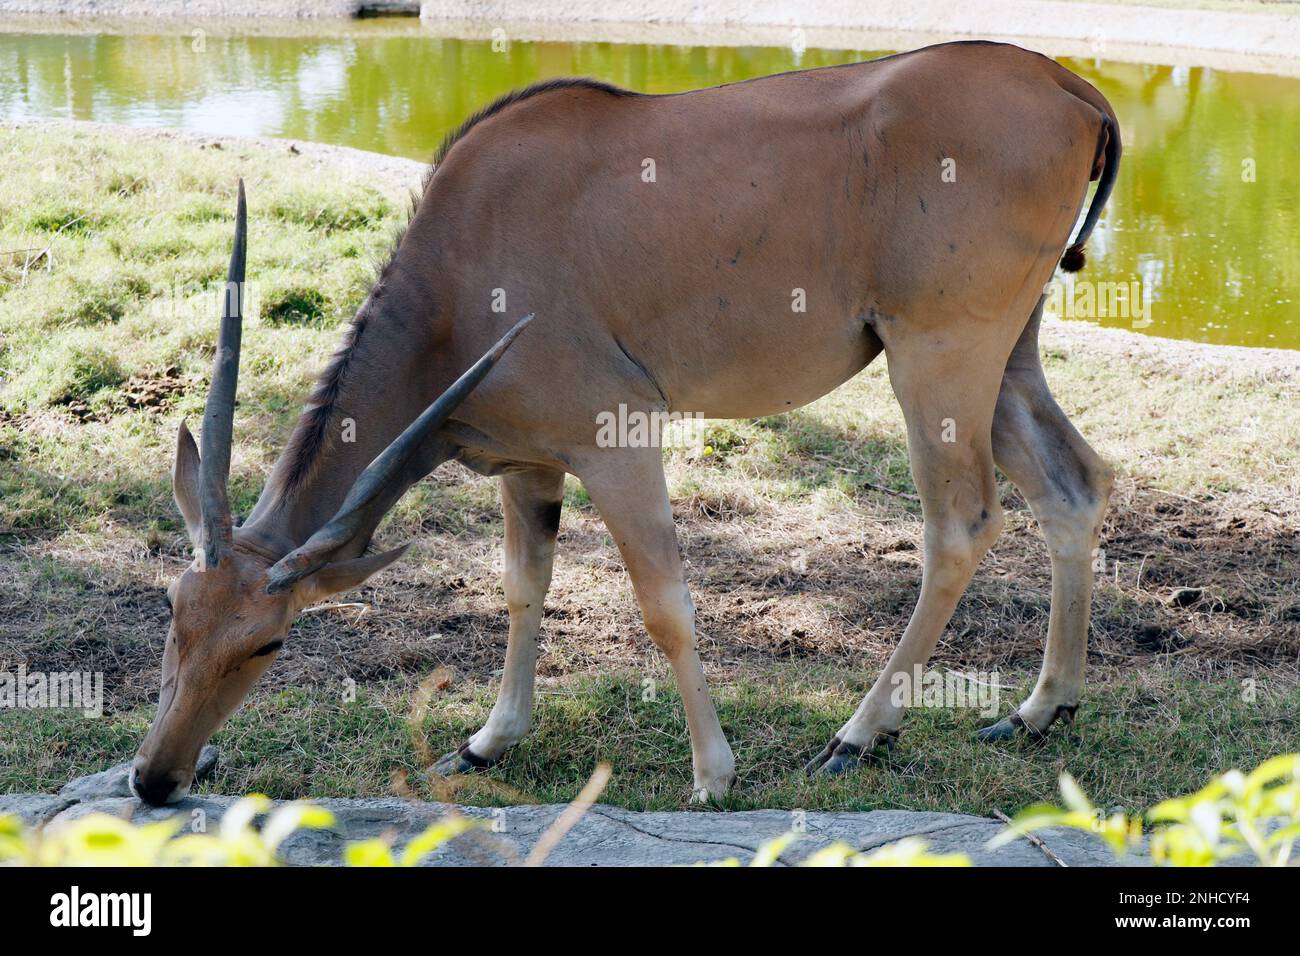 common eland (Taurotragus oryx), also known as the southern eland or eland antelope, is a large-sized savannah and plains antelope found in East and S Stock Photo